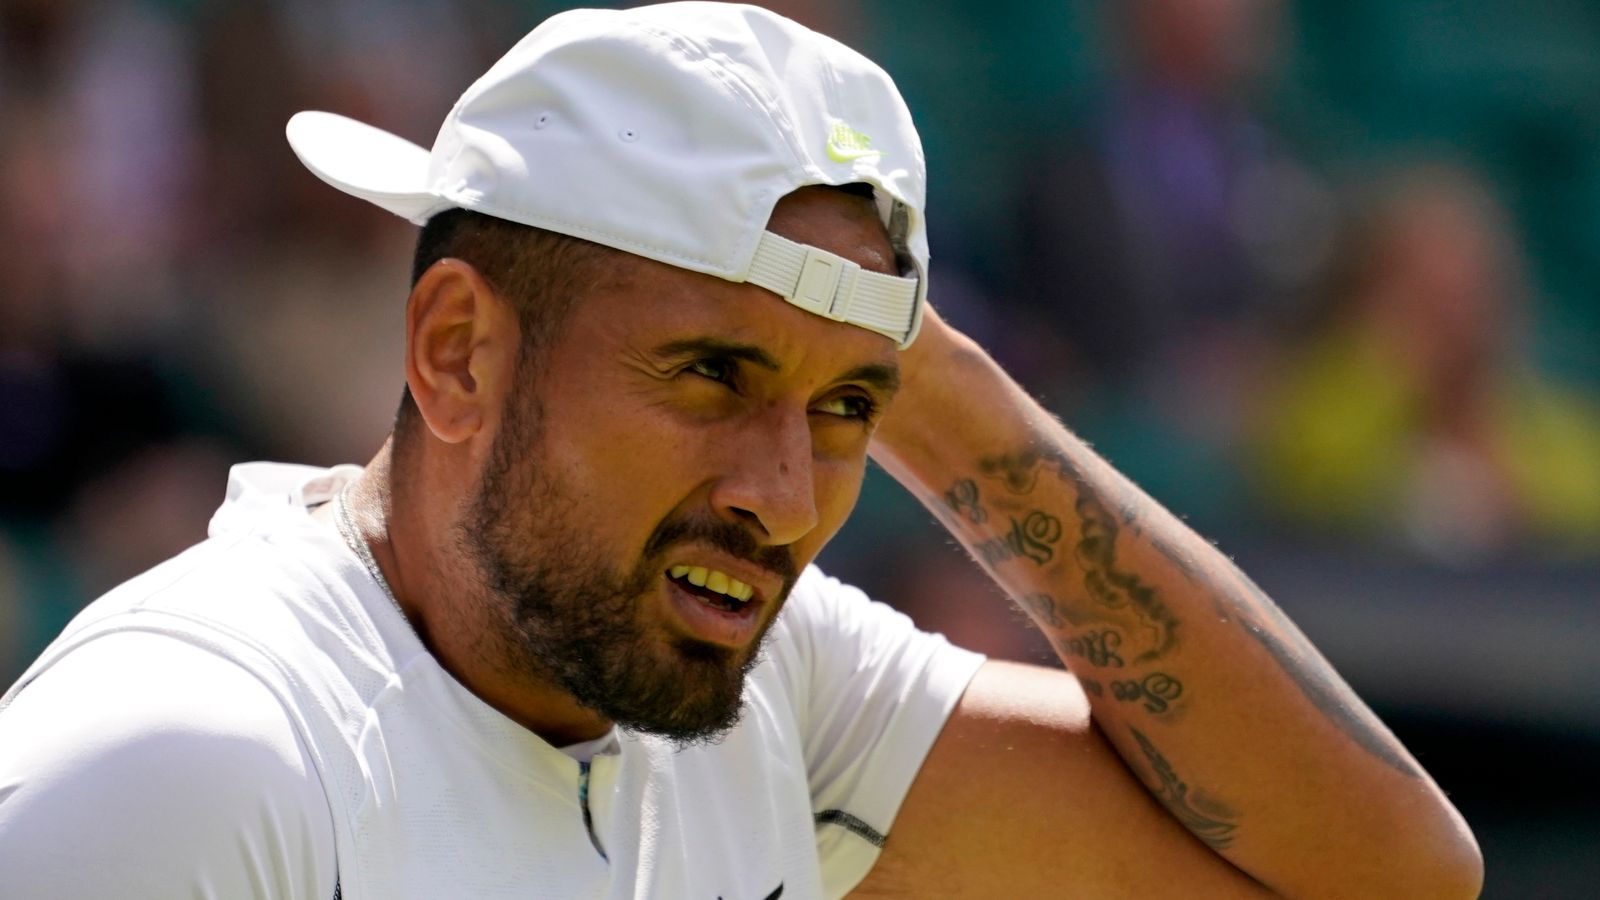 Nick Kyrgios charged with assault and will appear in Canberra court in August